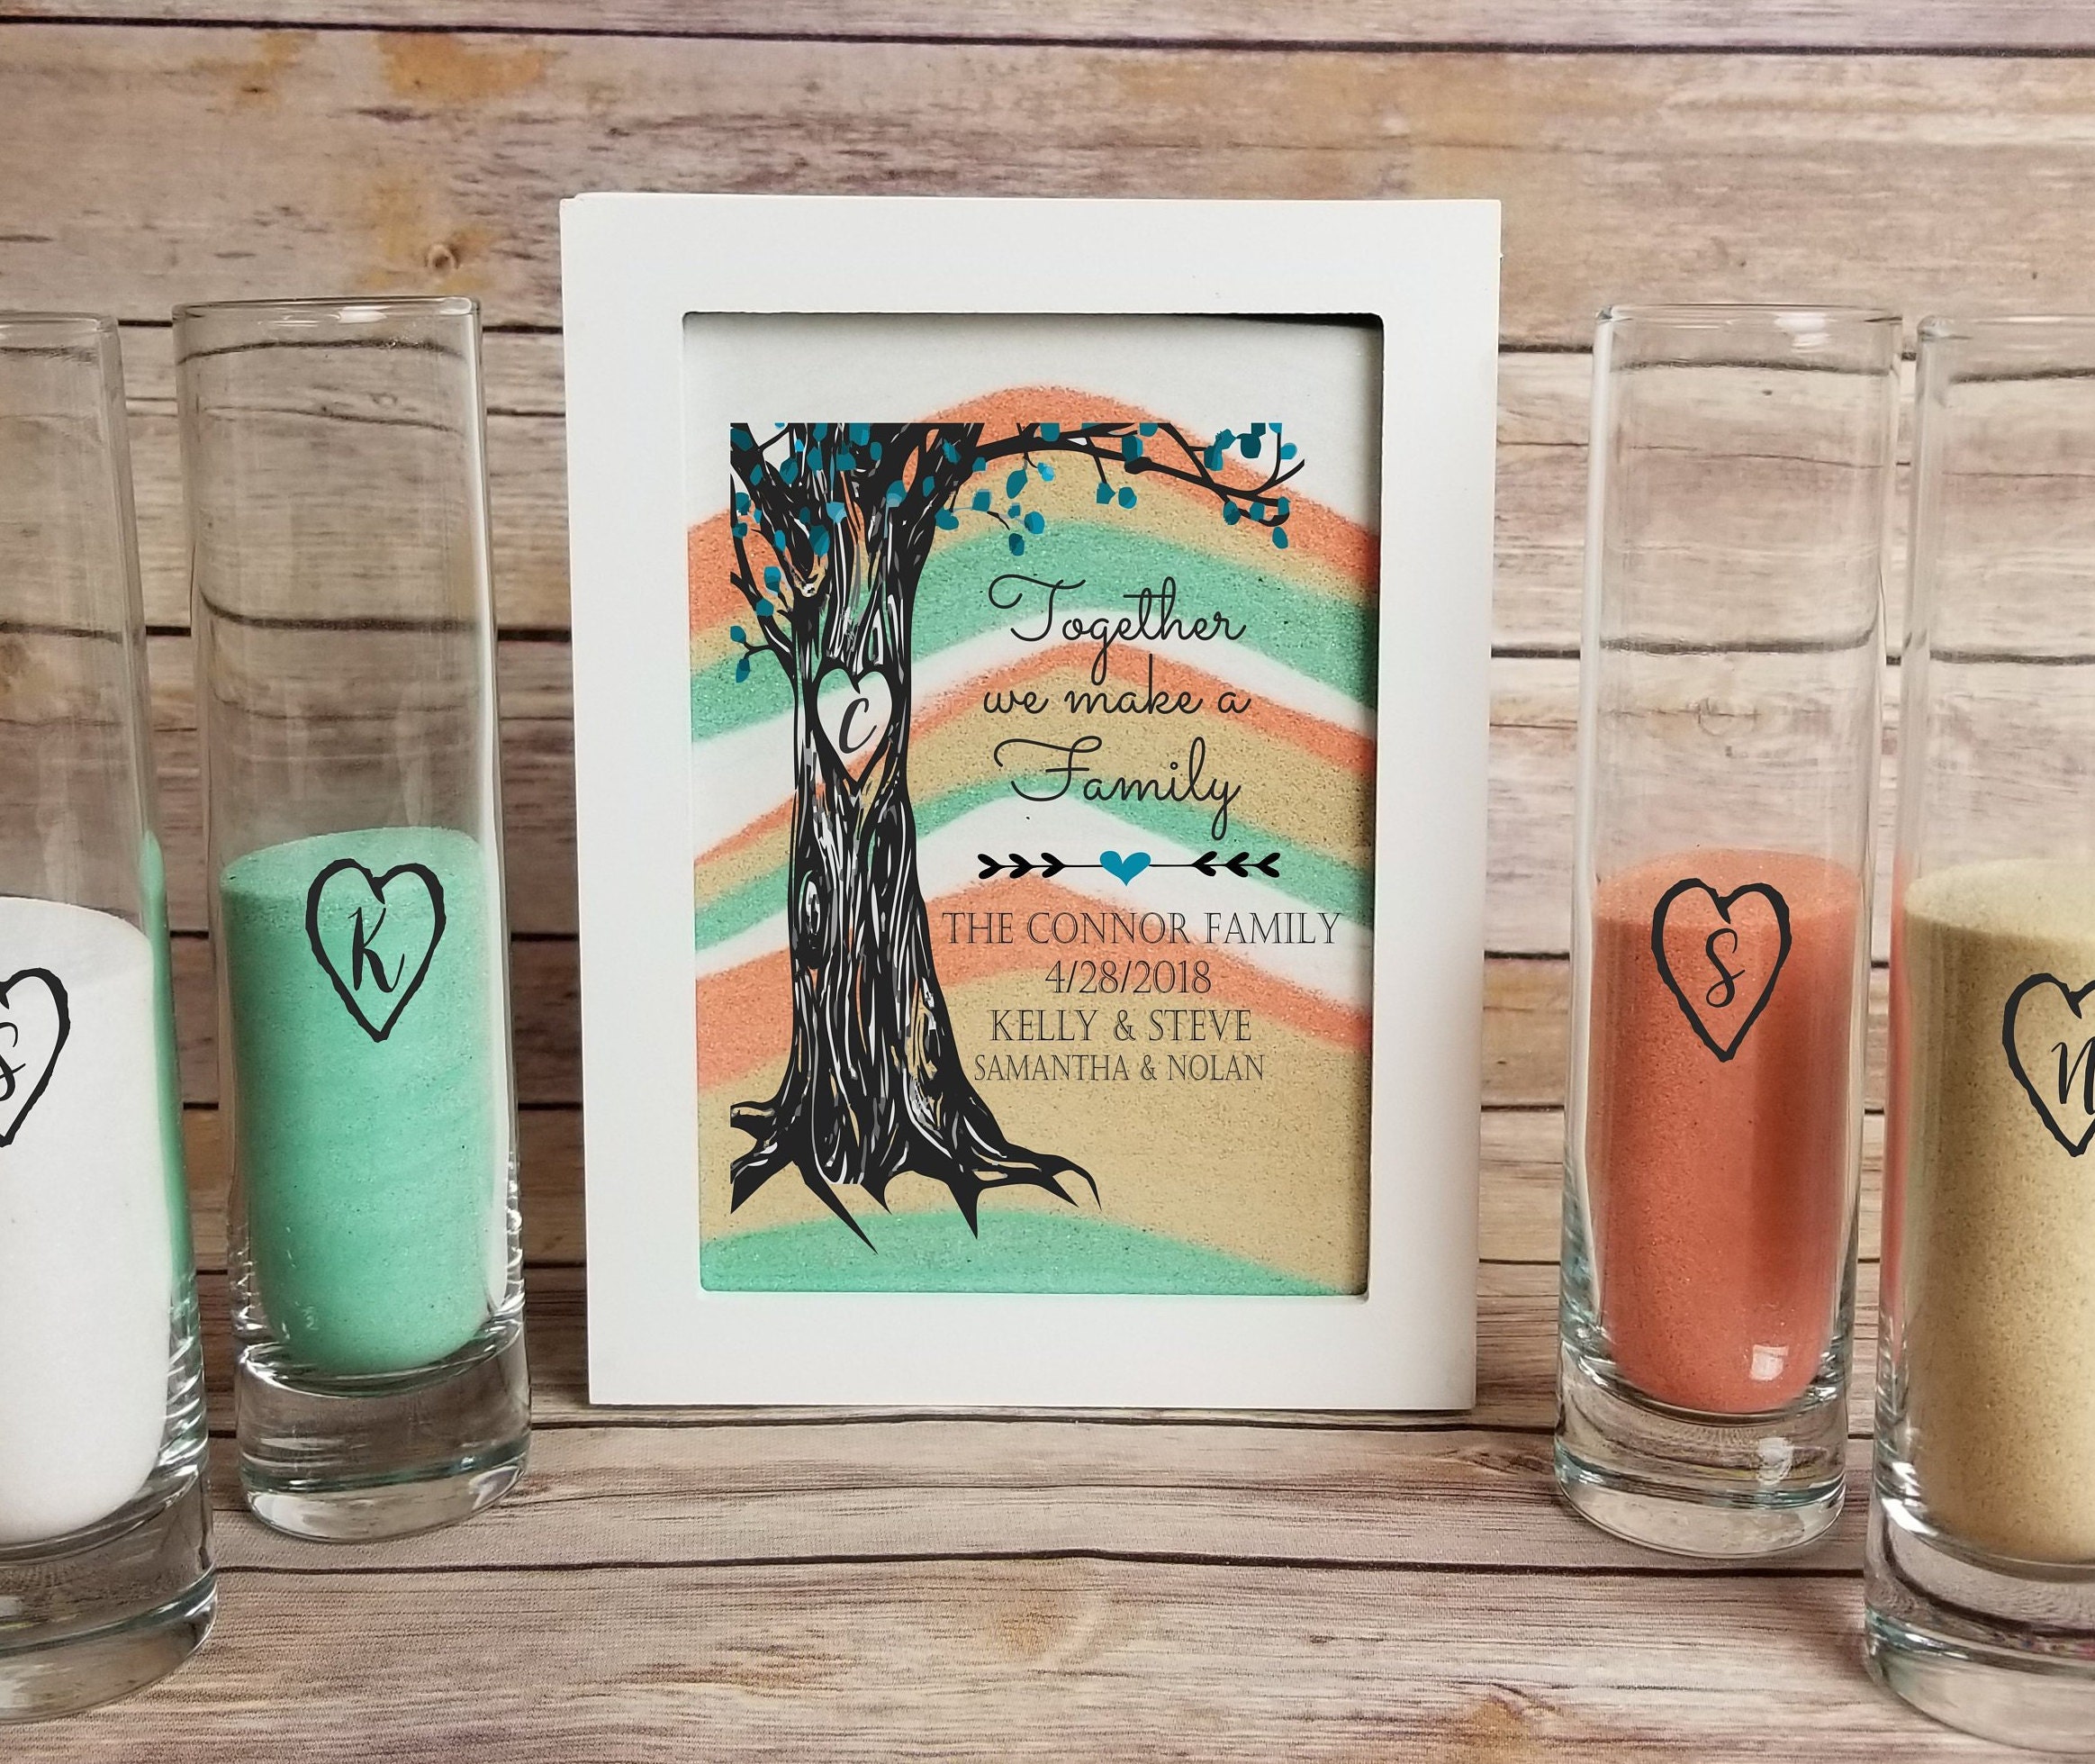 Blended Family Wedding Sand Ceremony Shadow Box Set, Unity Candle Alternative, Together We Make A Family, Frame And